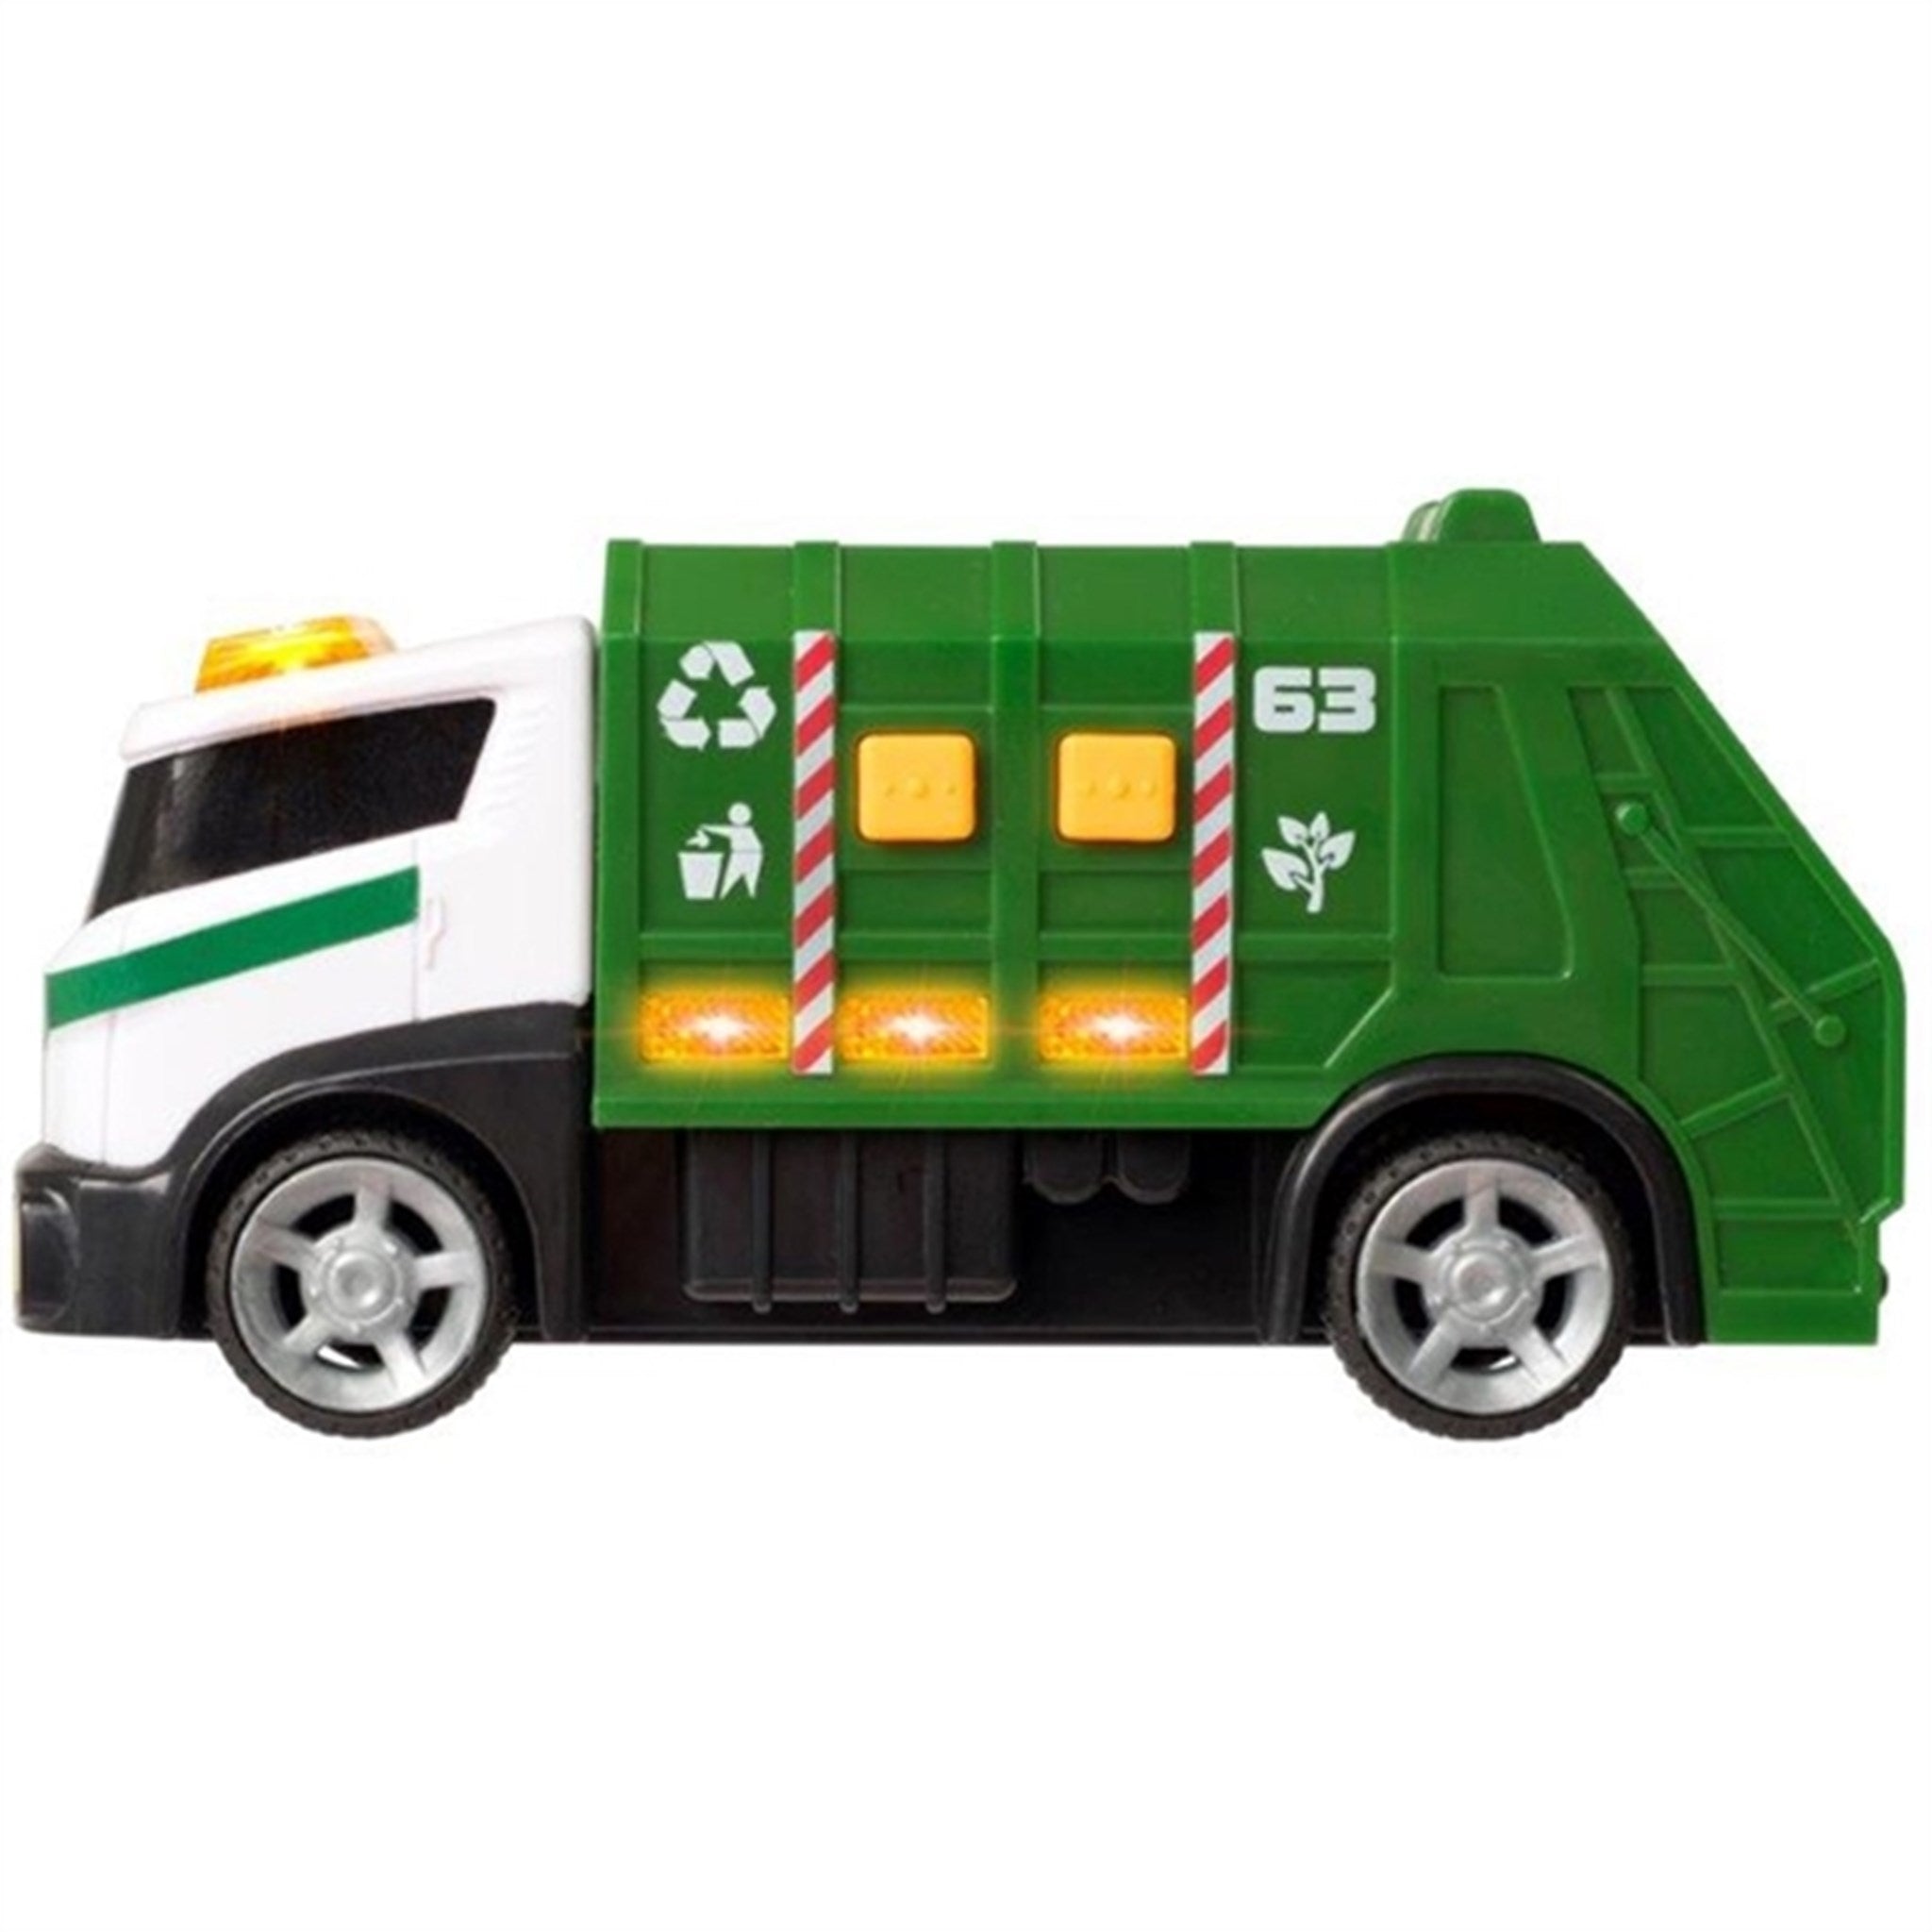 Teamsterz Small L&S Garbage Truck 4